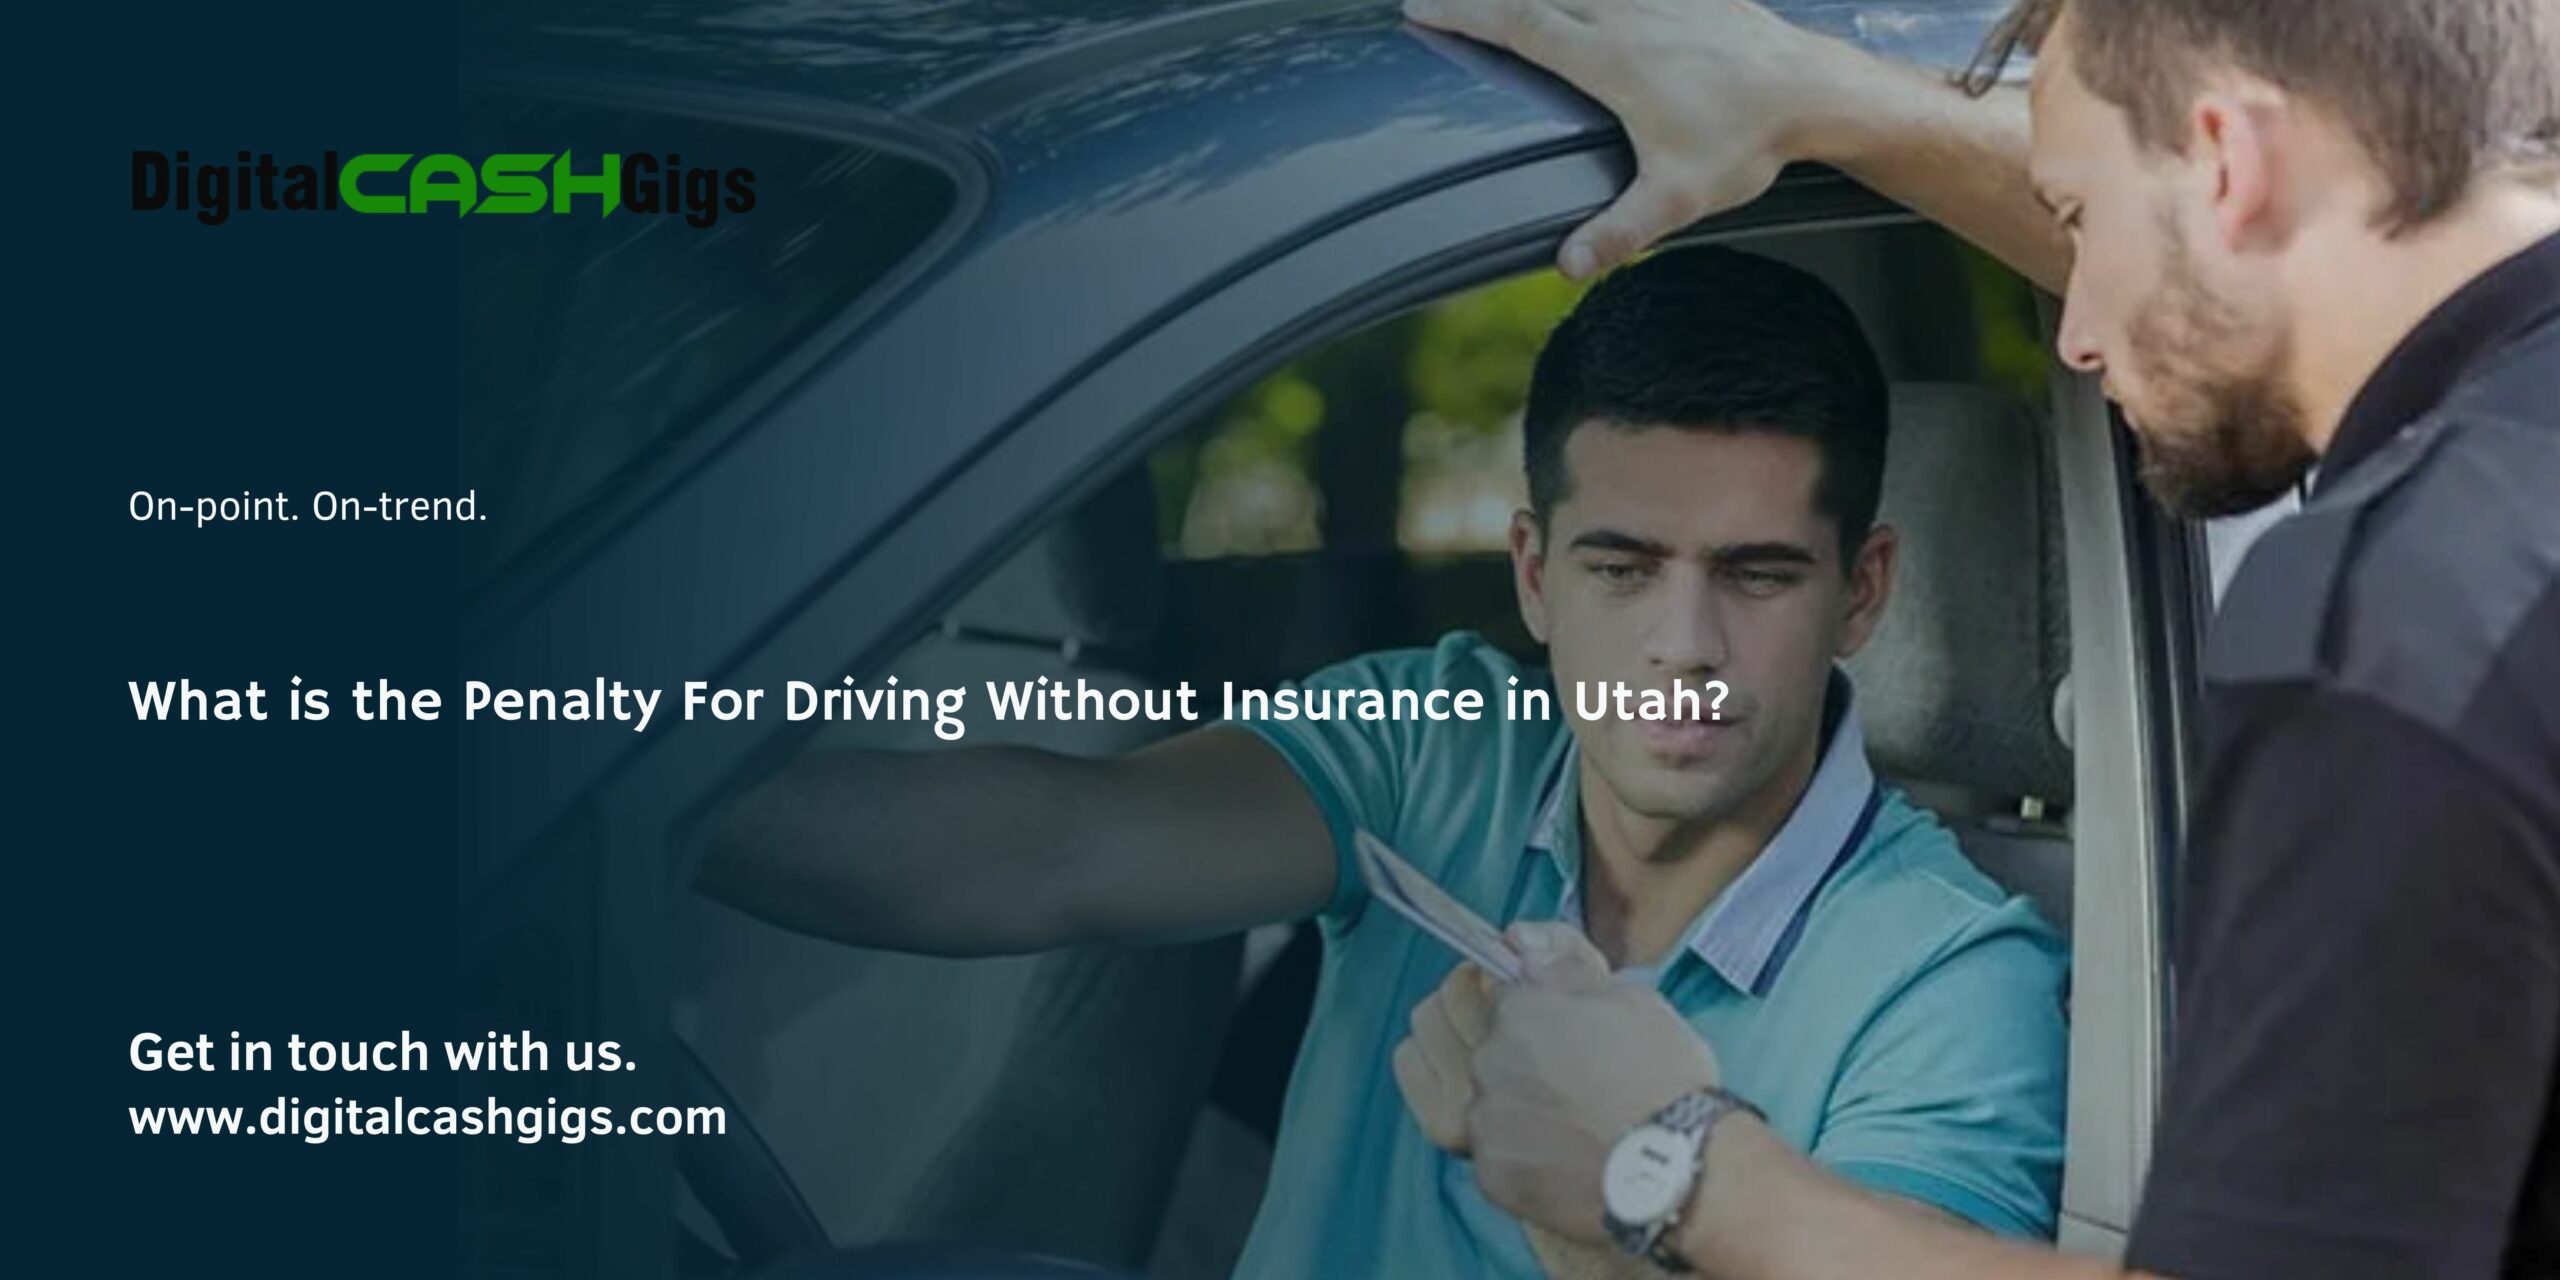 What is the Penalty For Driving Without Insurance in Utah?